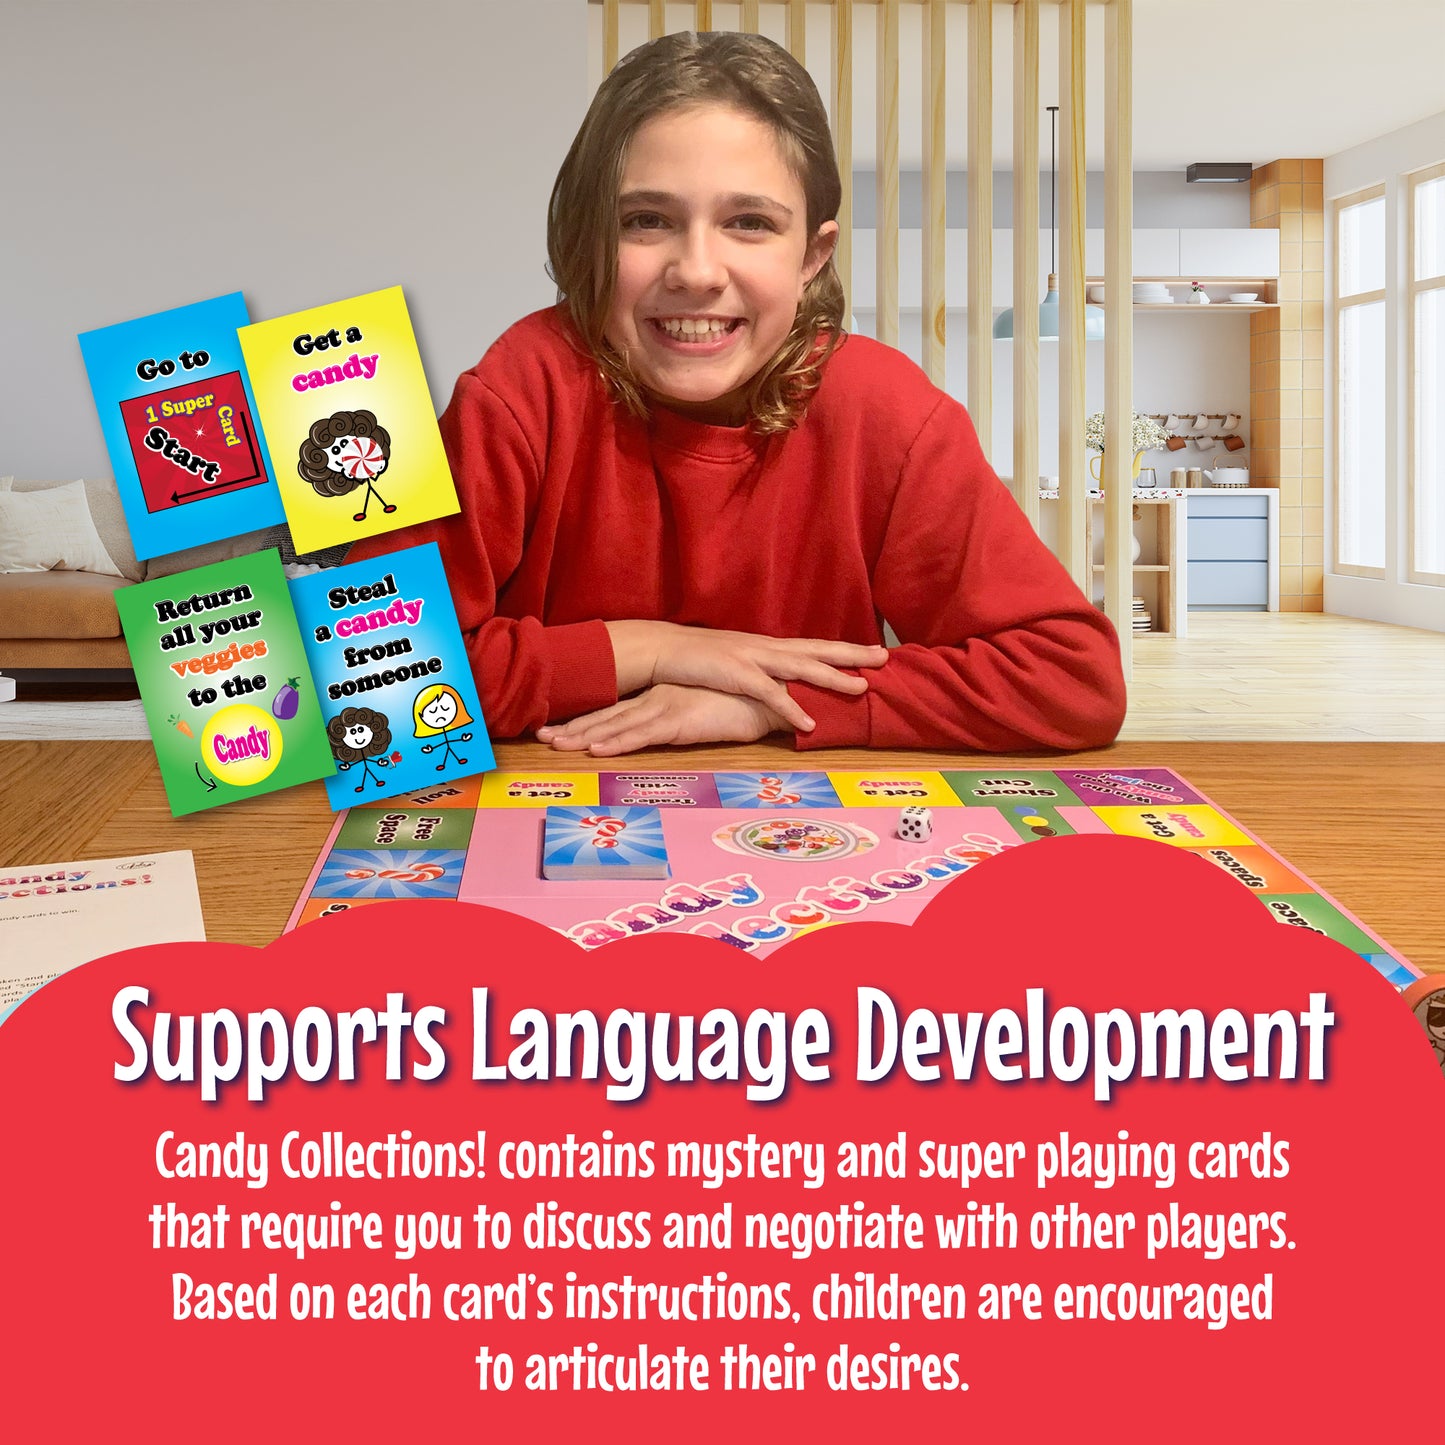 Board Game that Supports Language Development